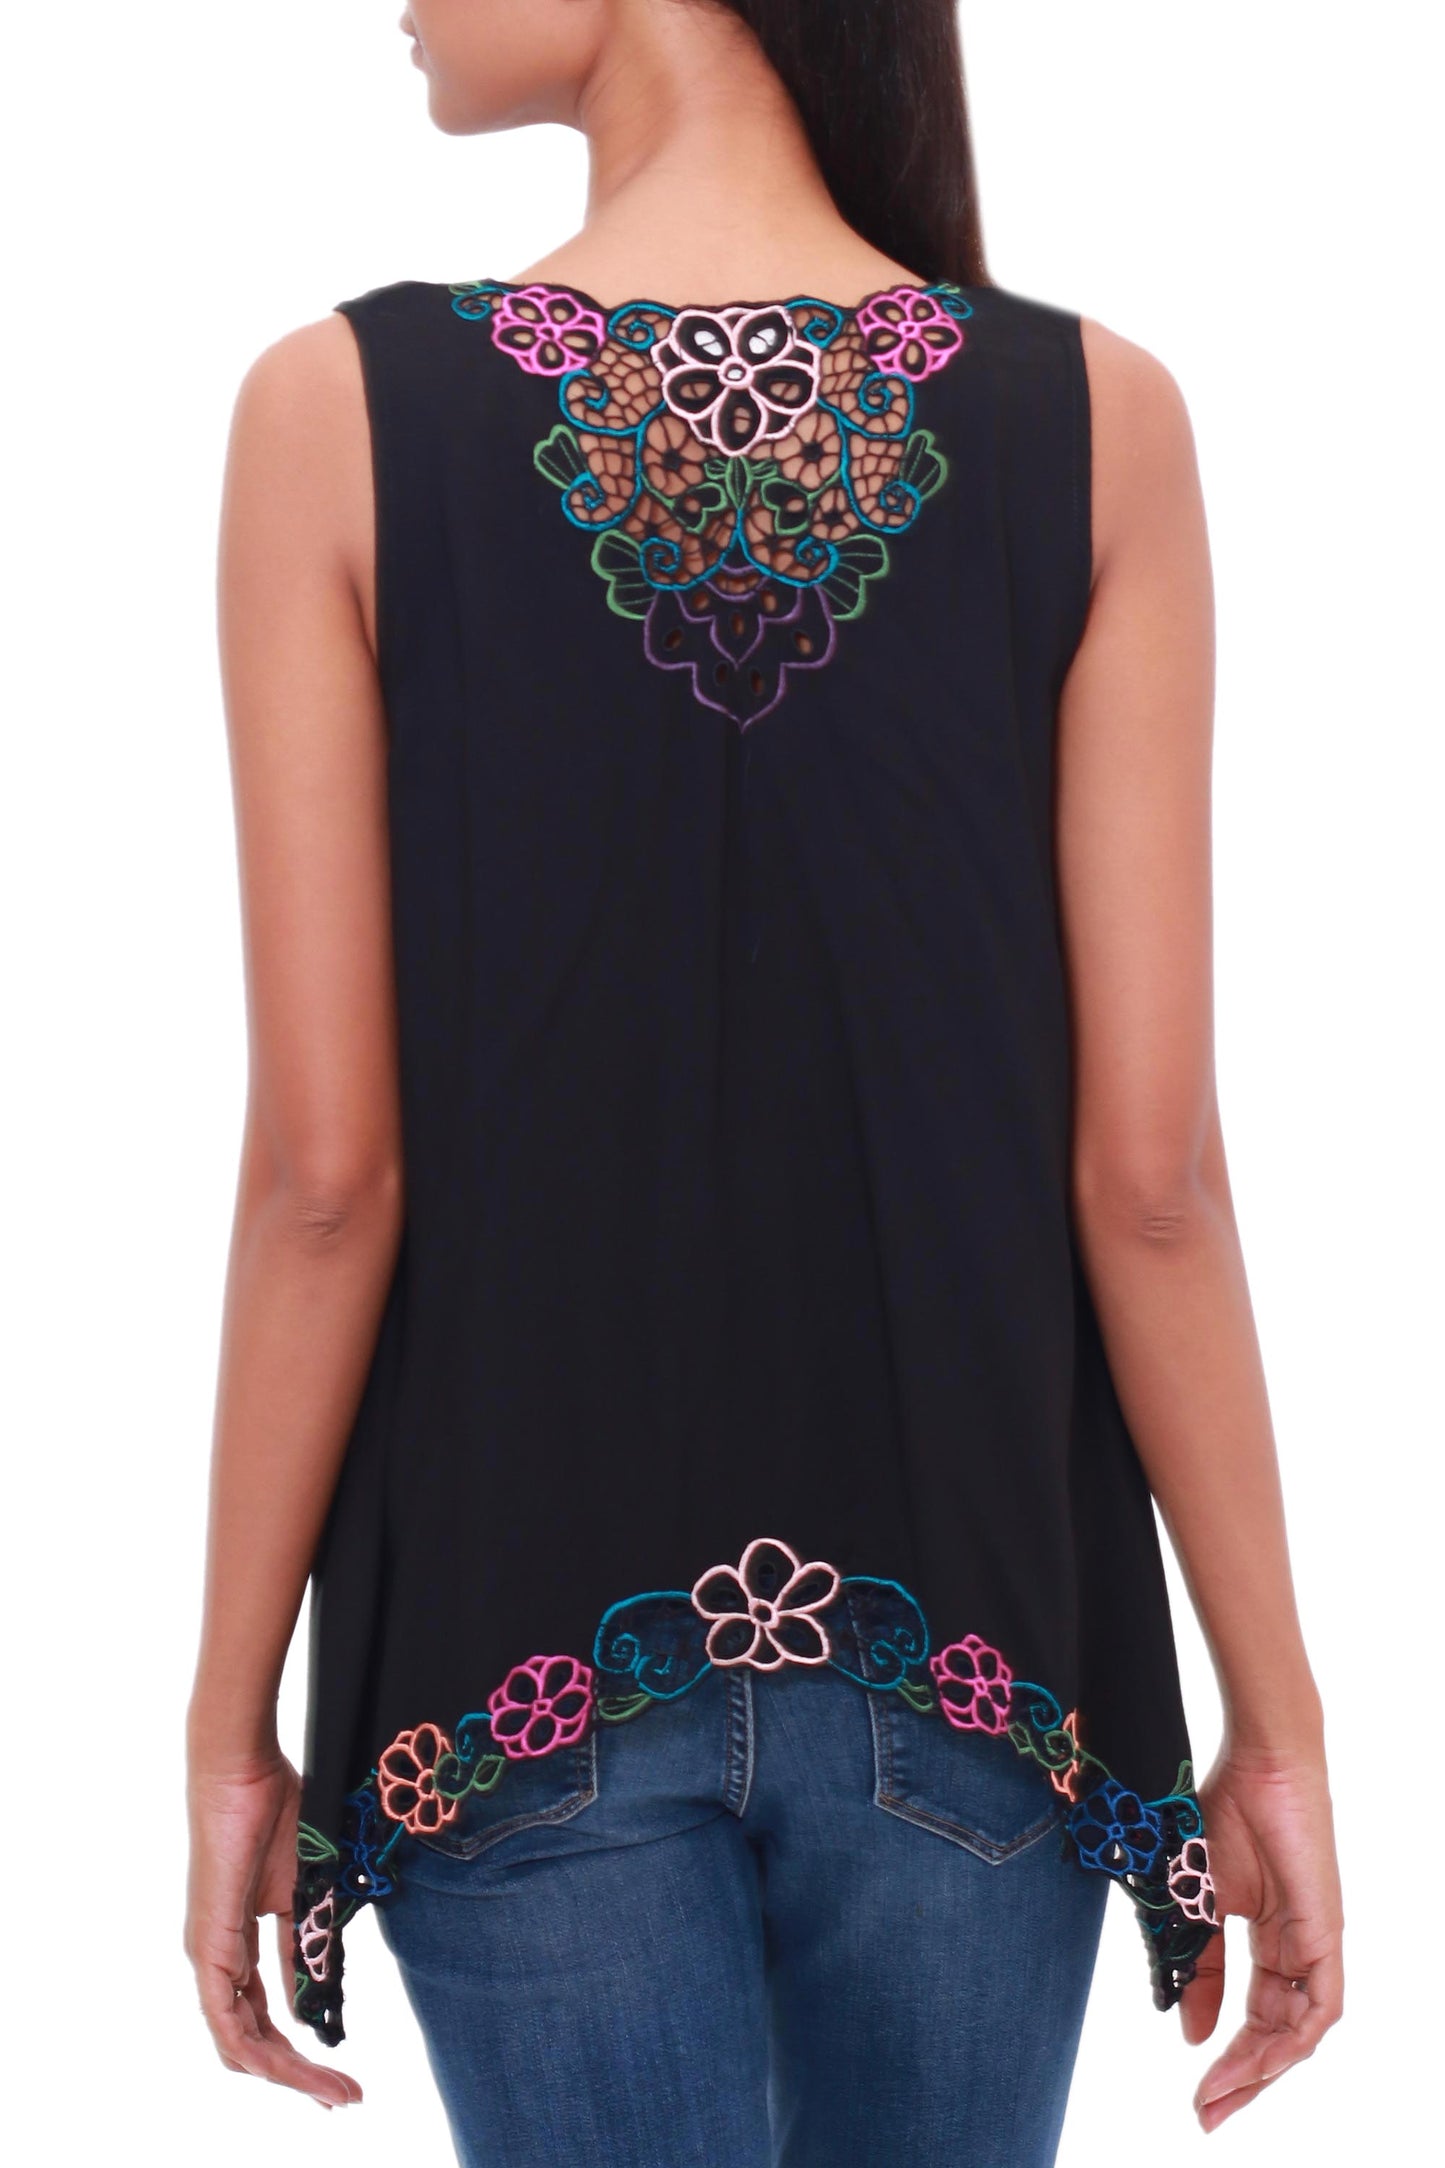 Flower Colors in Black Floral Embroidered Rayon Blouse in Black from Bali